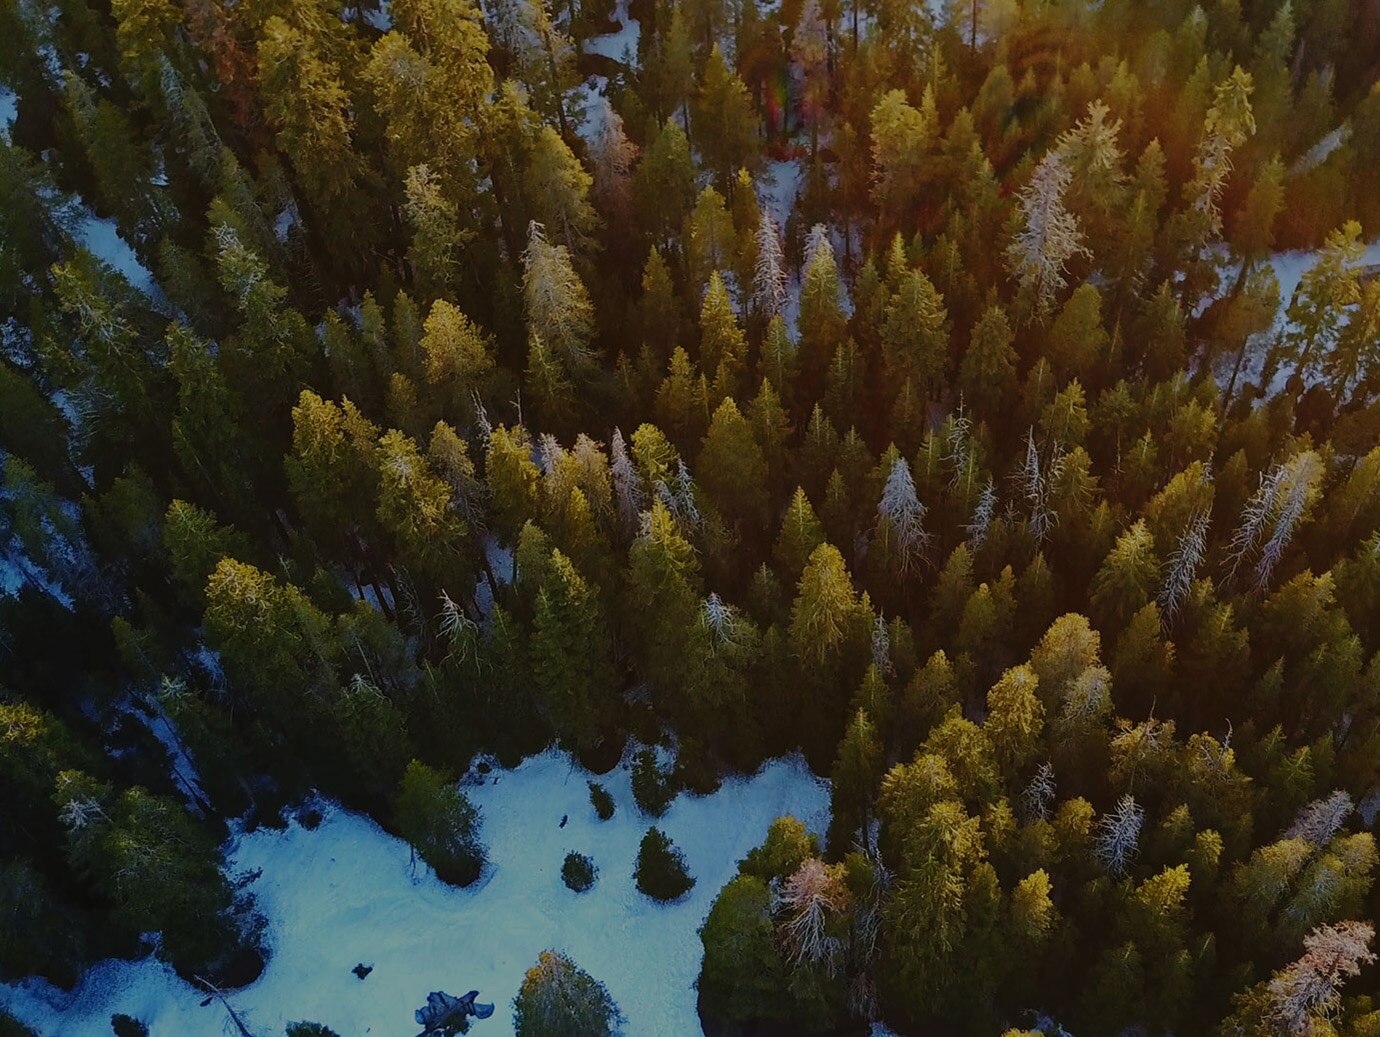 Aerial view of pine and spruce trees in a snowy forest